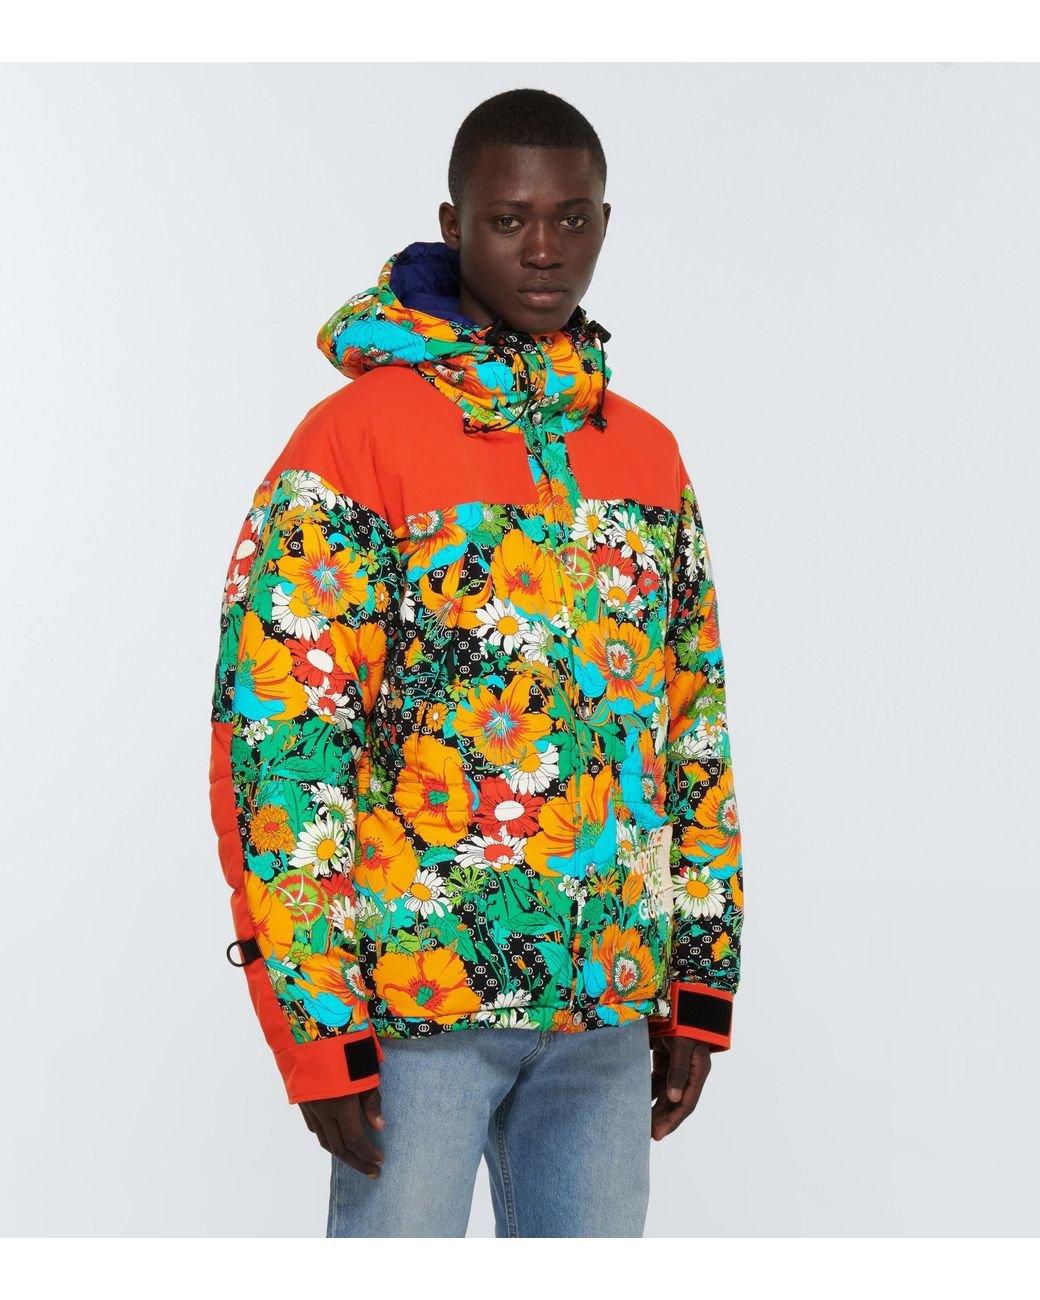 Gucci x The North Face Nylon Jacket Blue Men's - SS21 - US